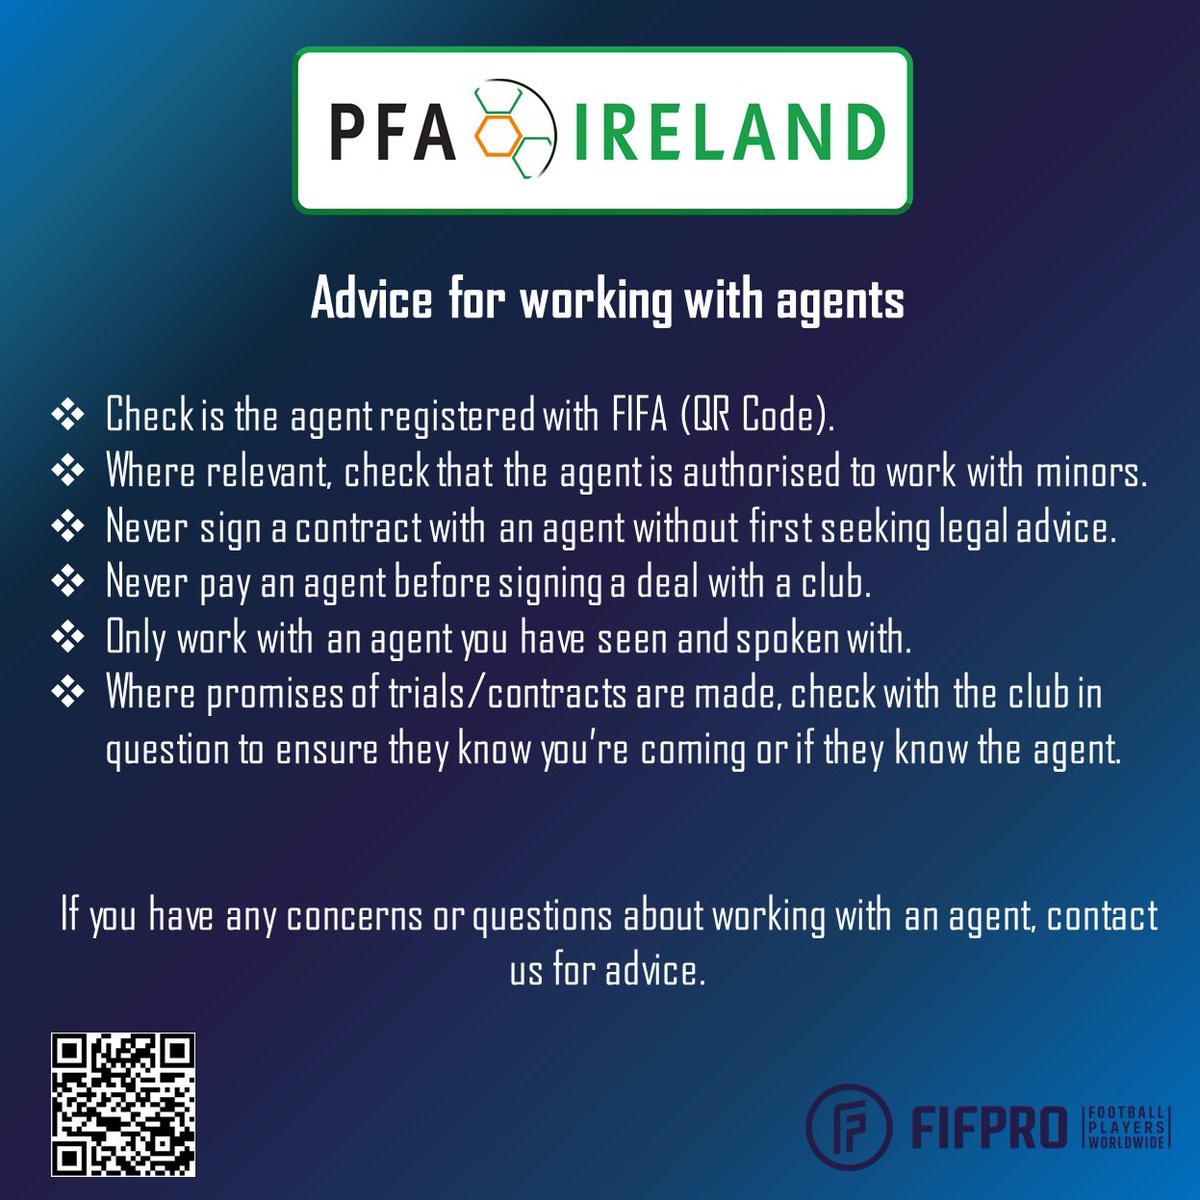 Advice for players on working with agents. @FIFPRO